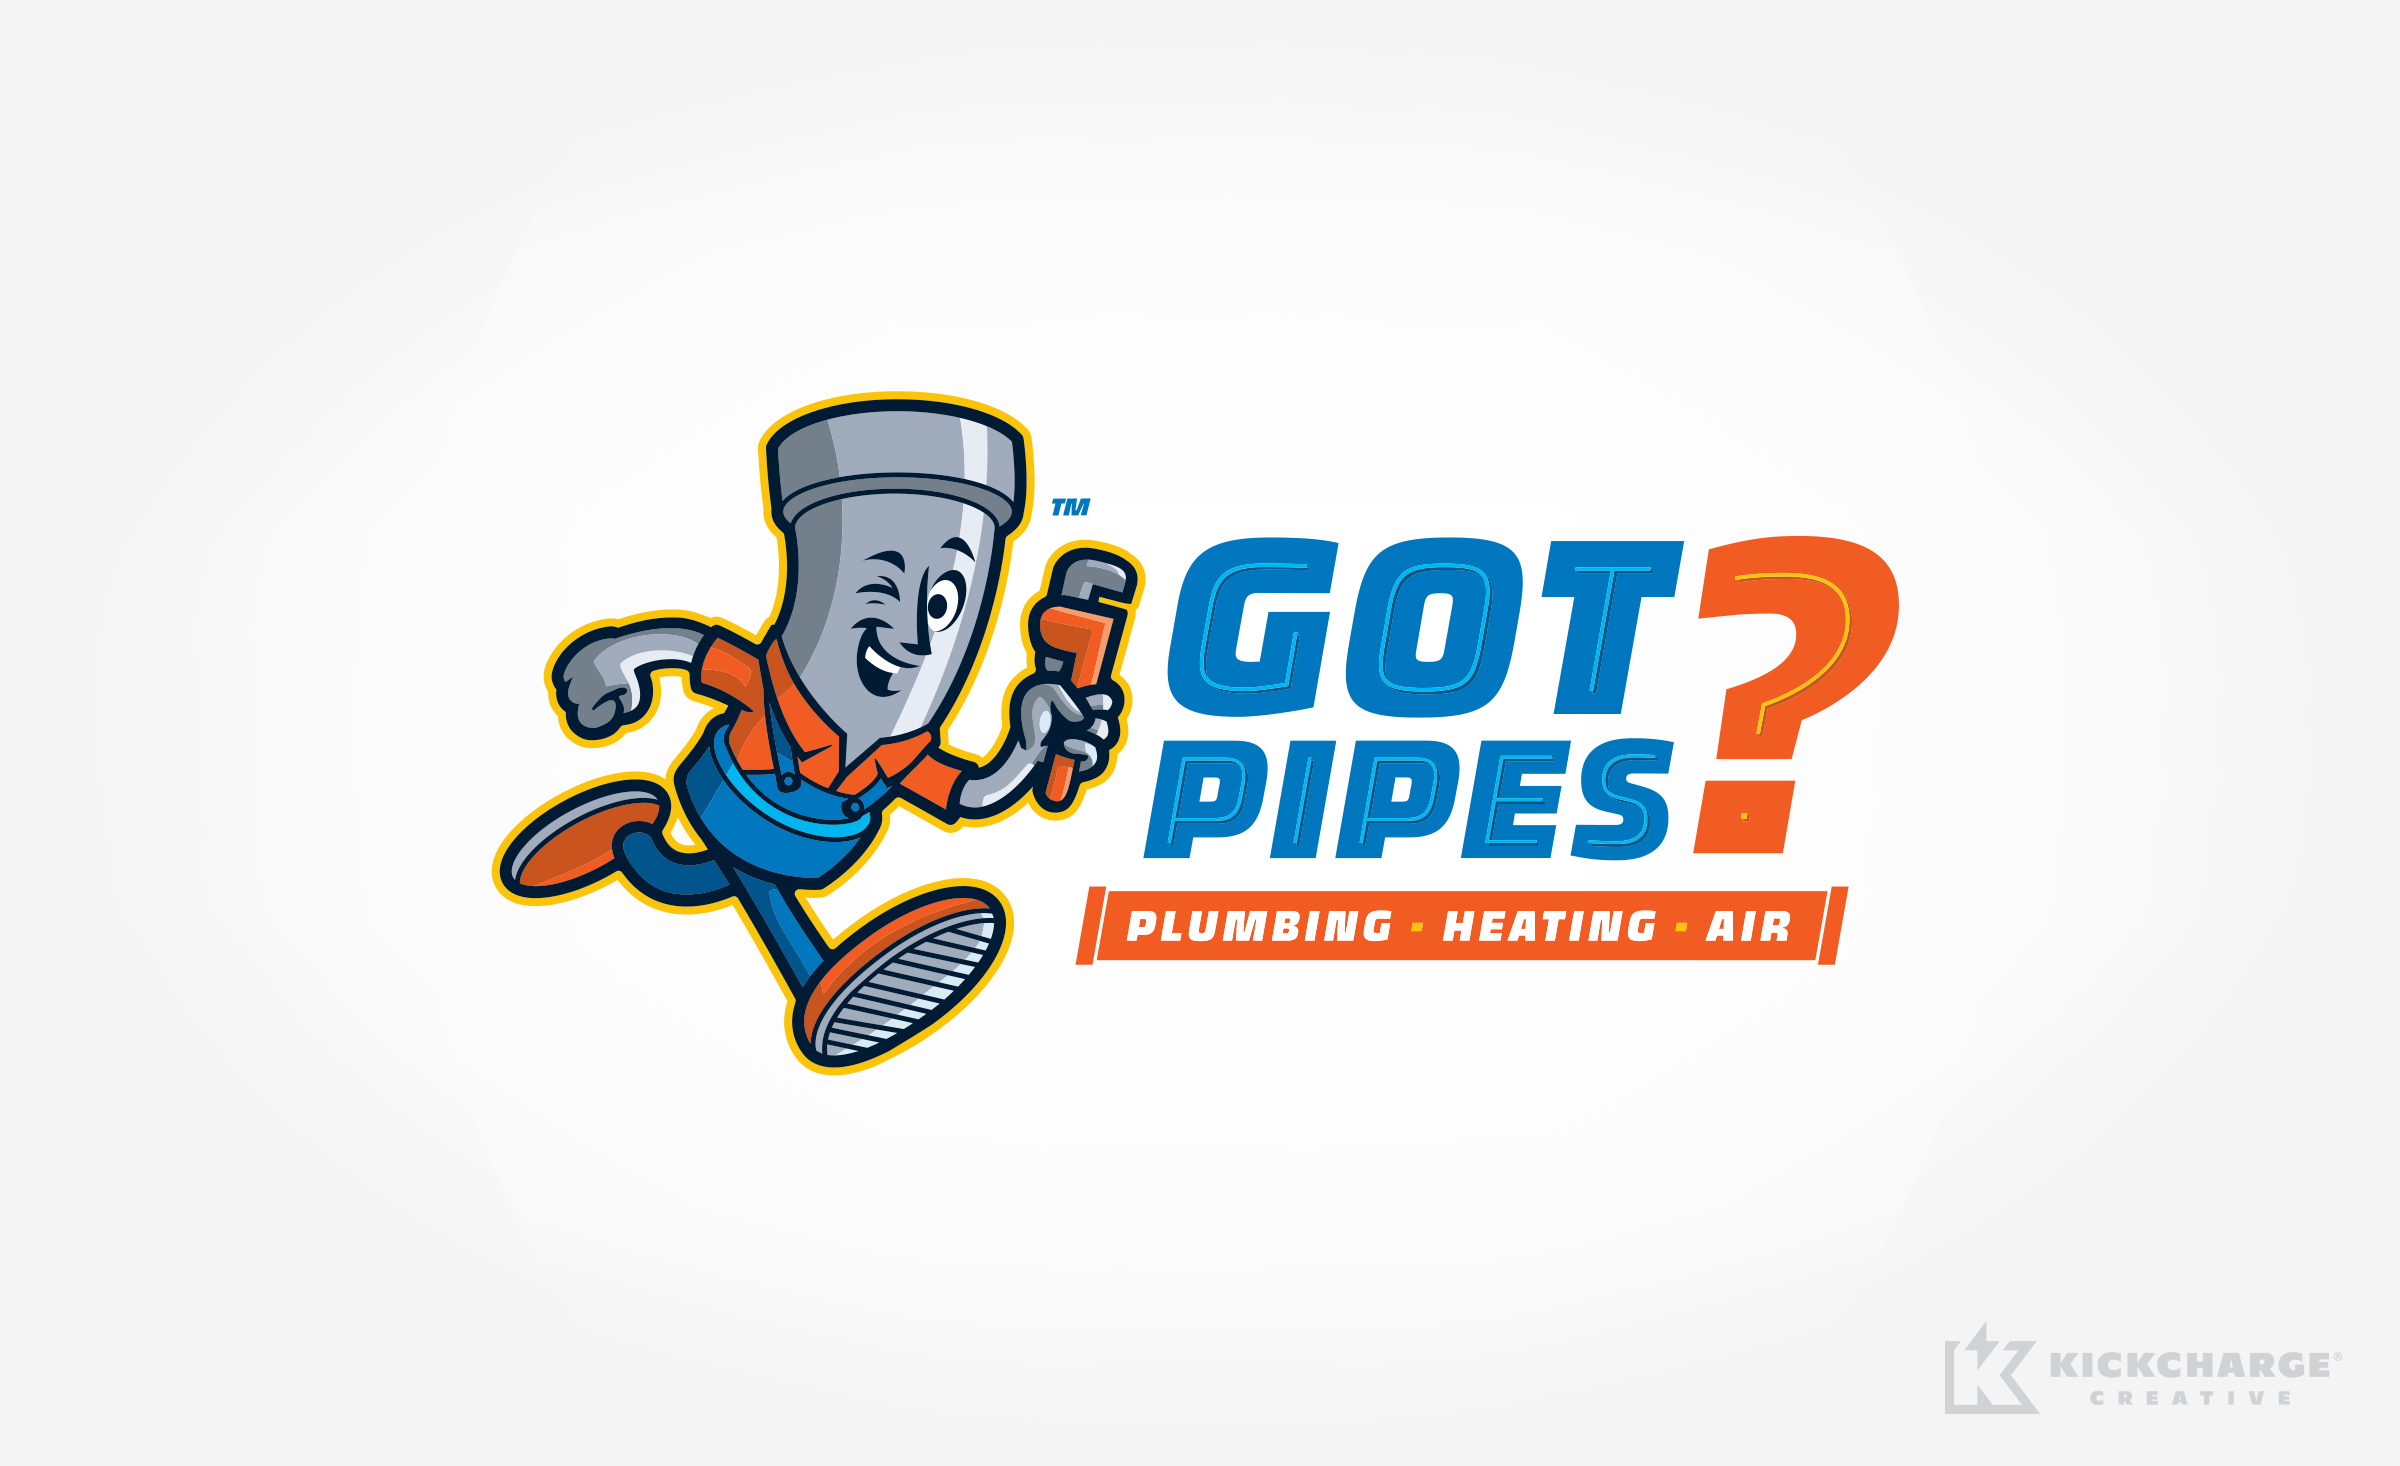 hvac and plumbing logo for Got Pipes?